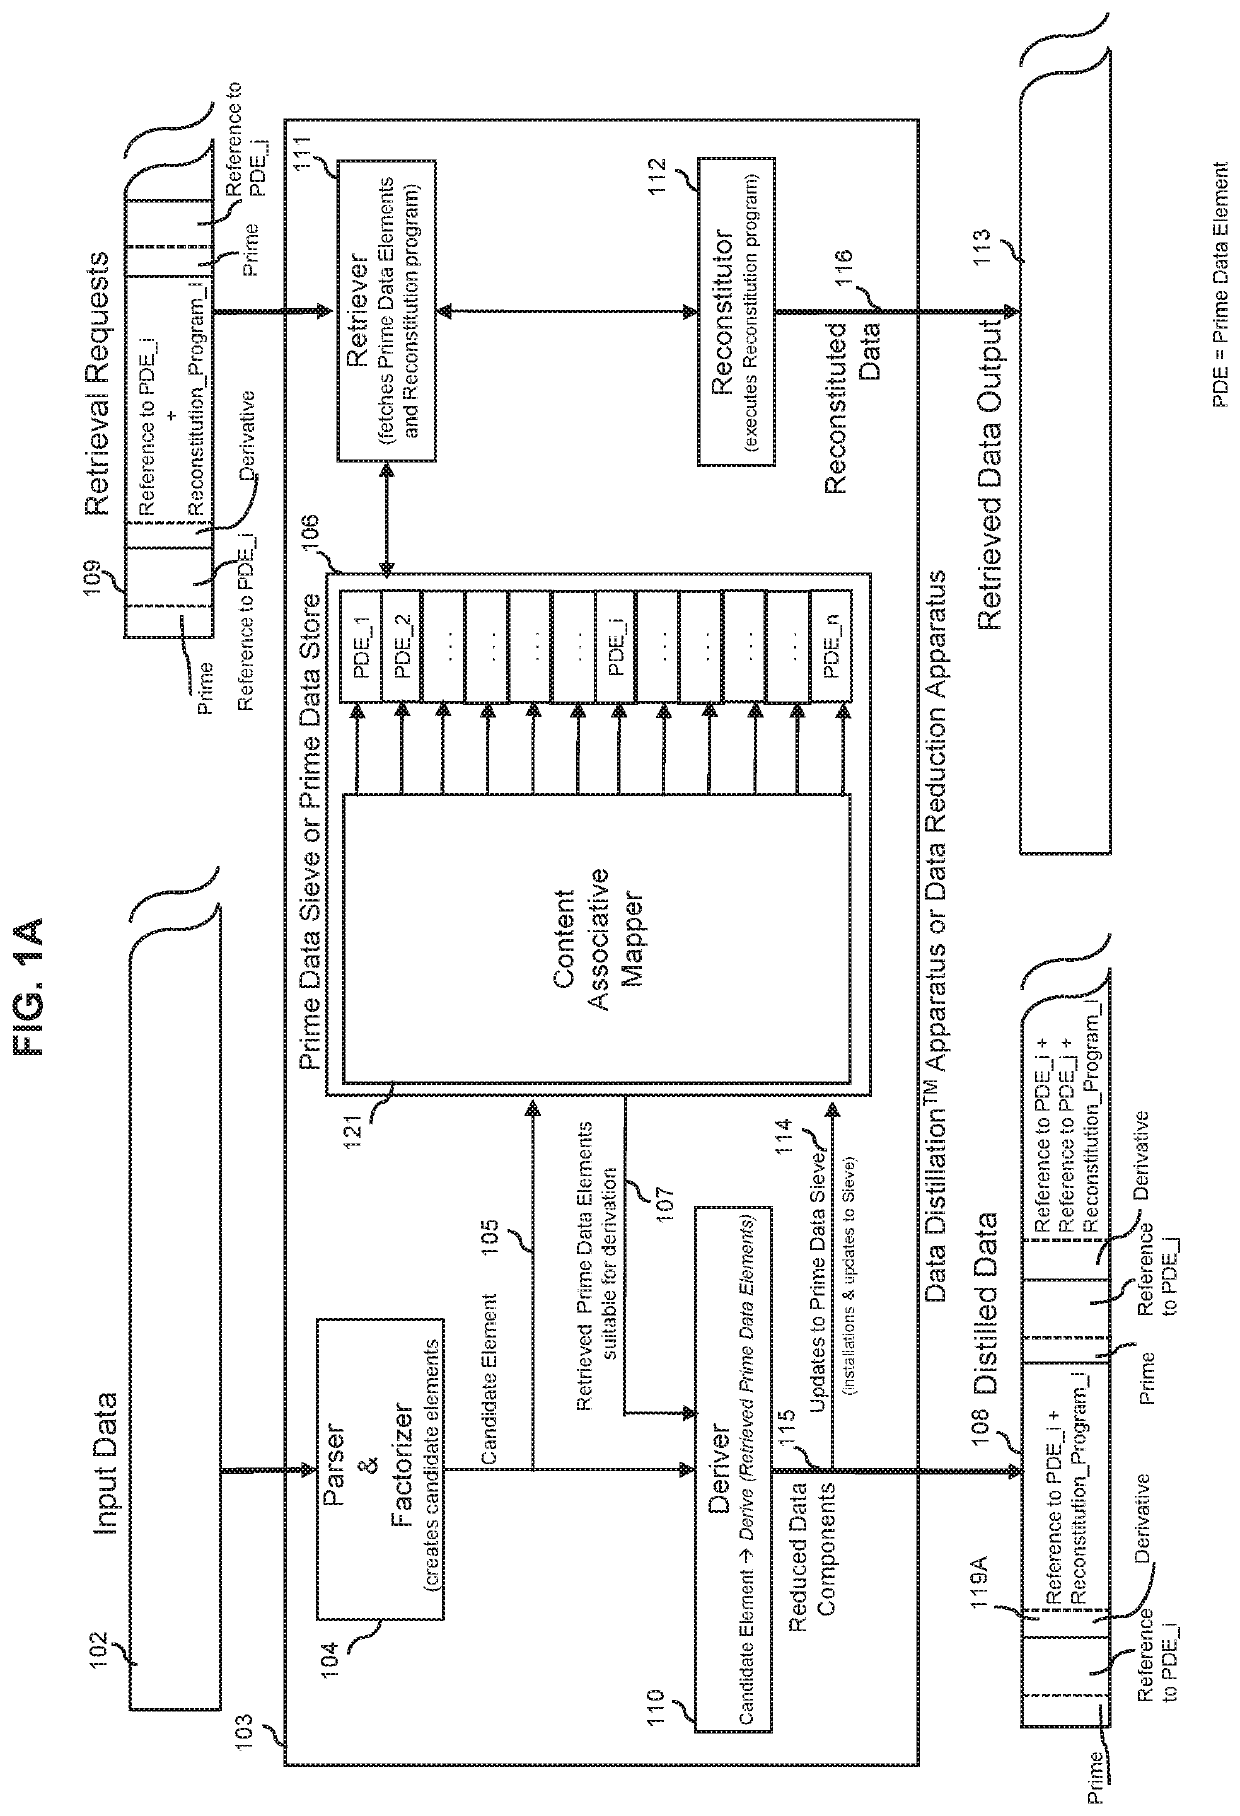 Lossless reduction of data by using a prime data sieve and performing multidimensional search and content-associative retrieval on data that has been losslessly reduced using a prime data sieve